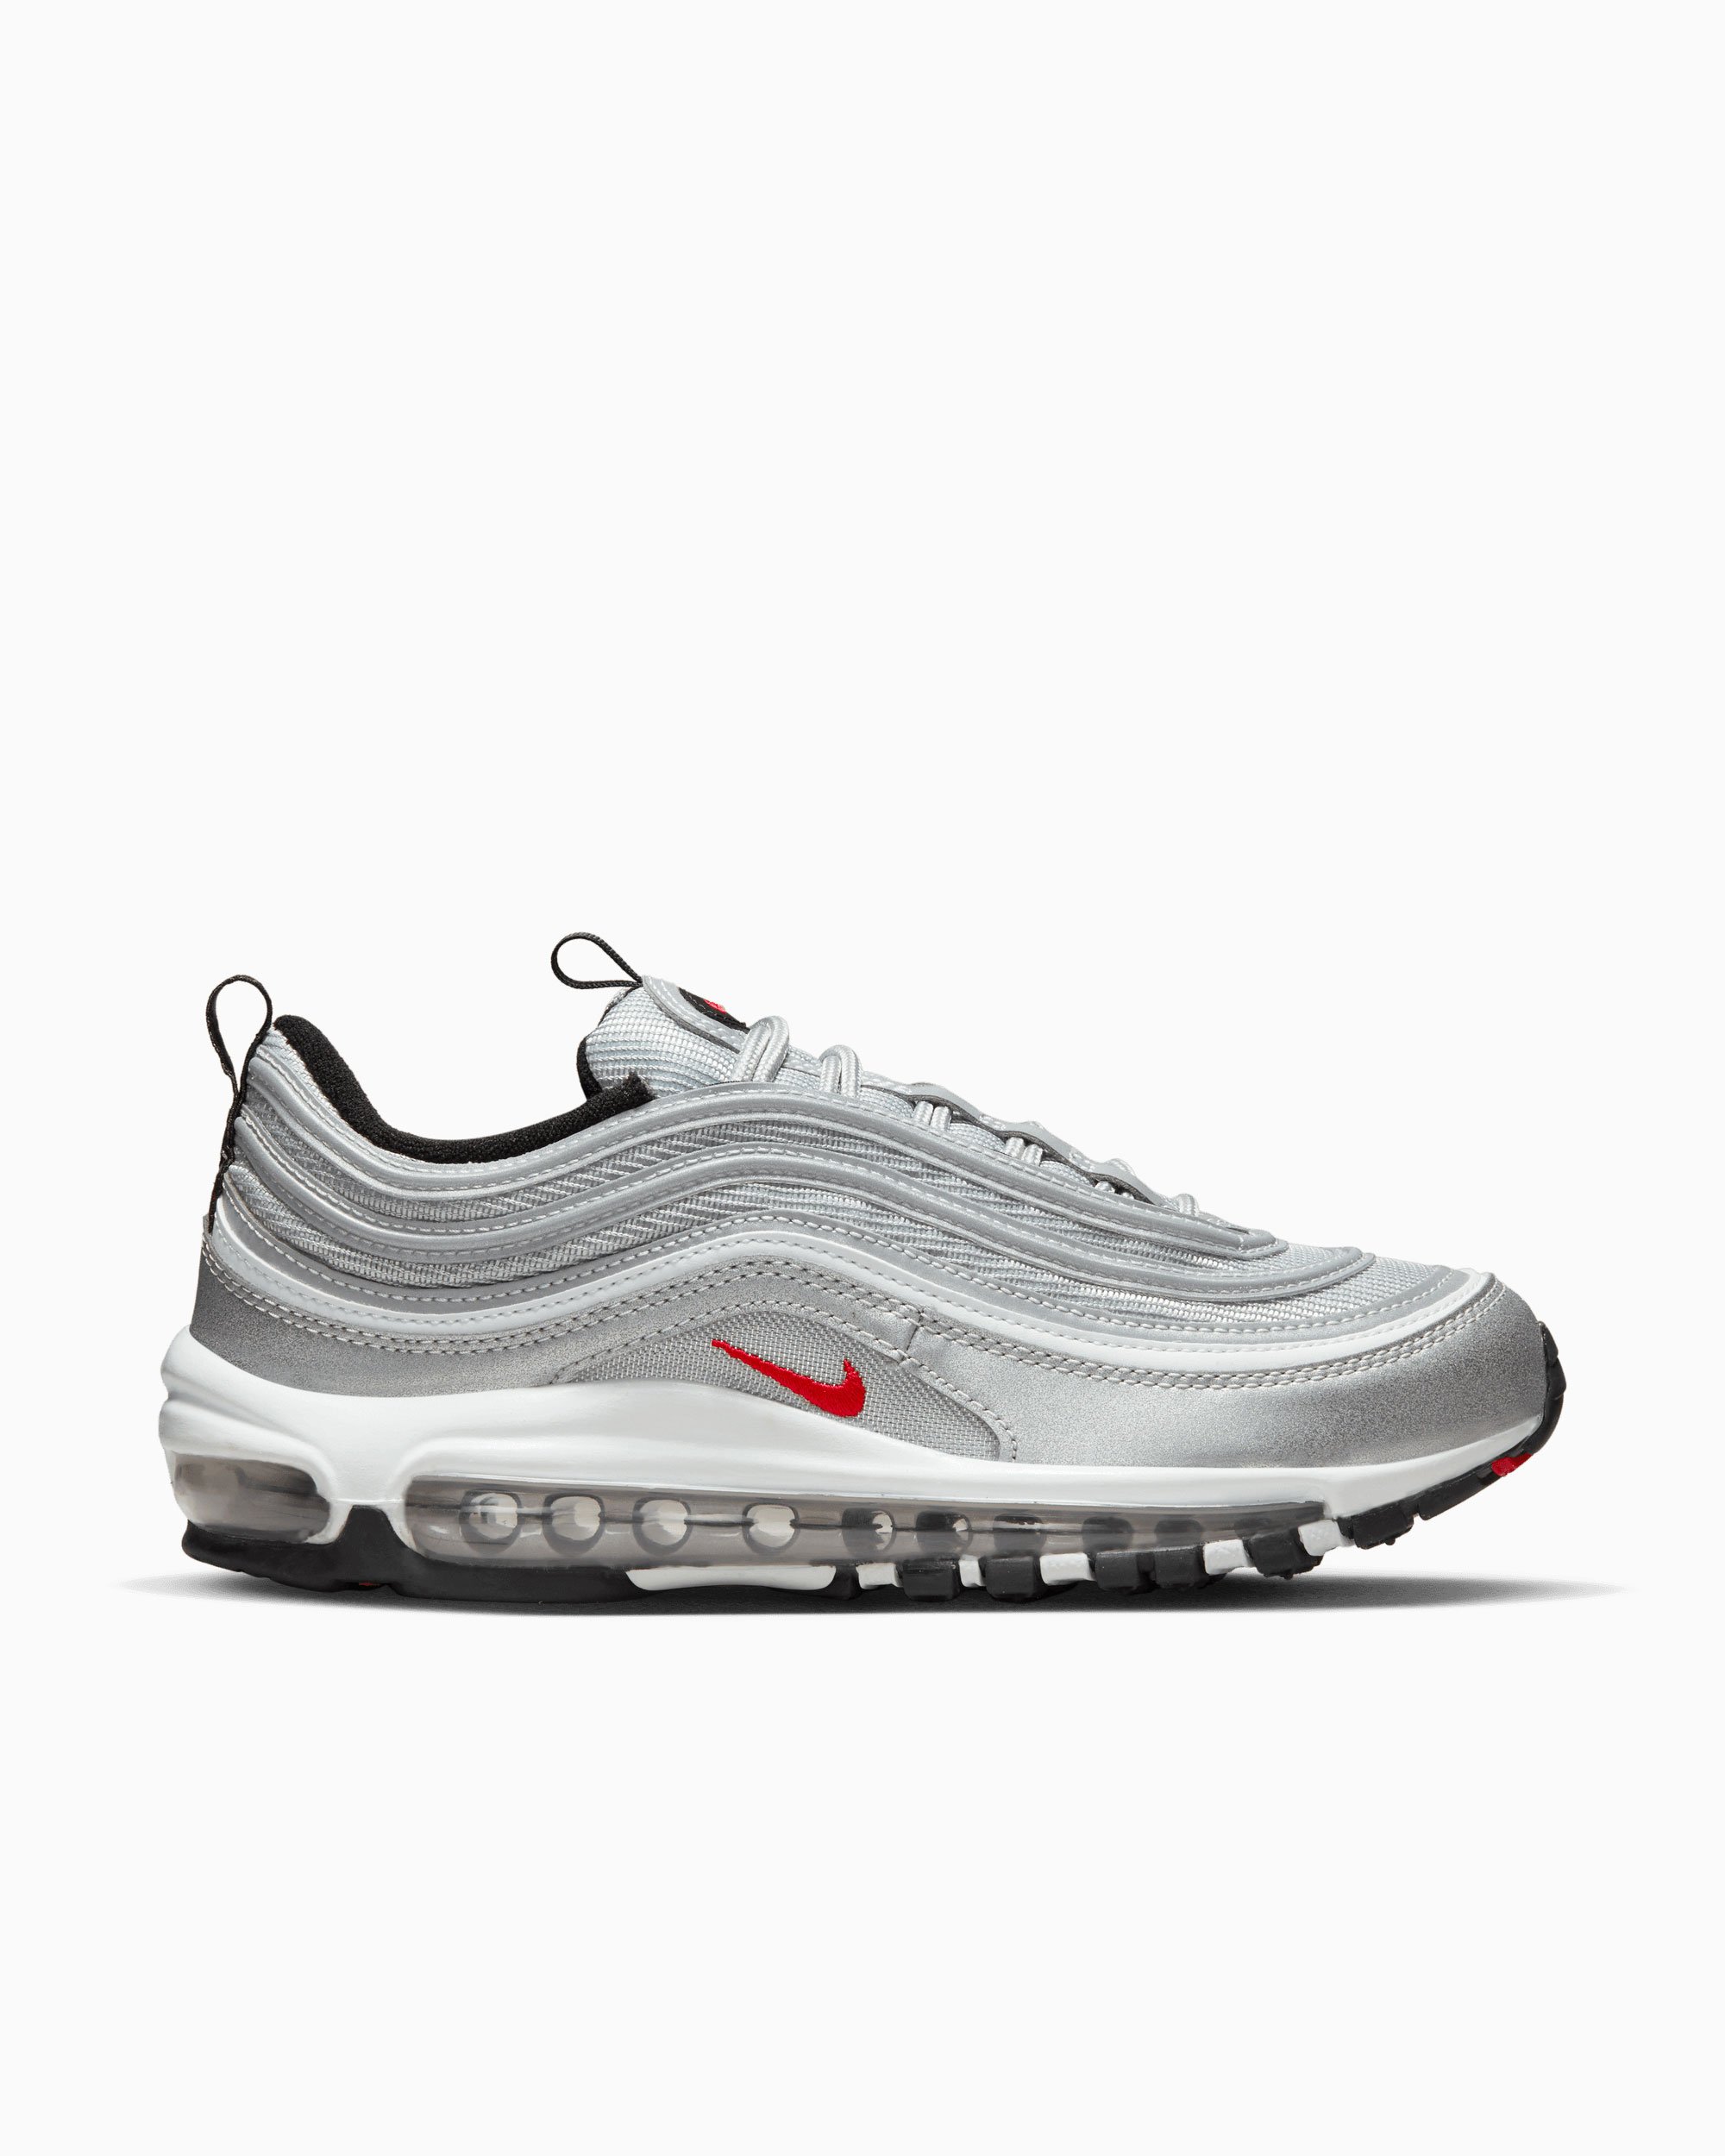 Round tissue recruit Nike Women's Air Max 97 OG "Silver Bullet" Gray DQ9131-002| Buy Online at  FOOTDISTRICT